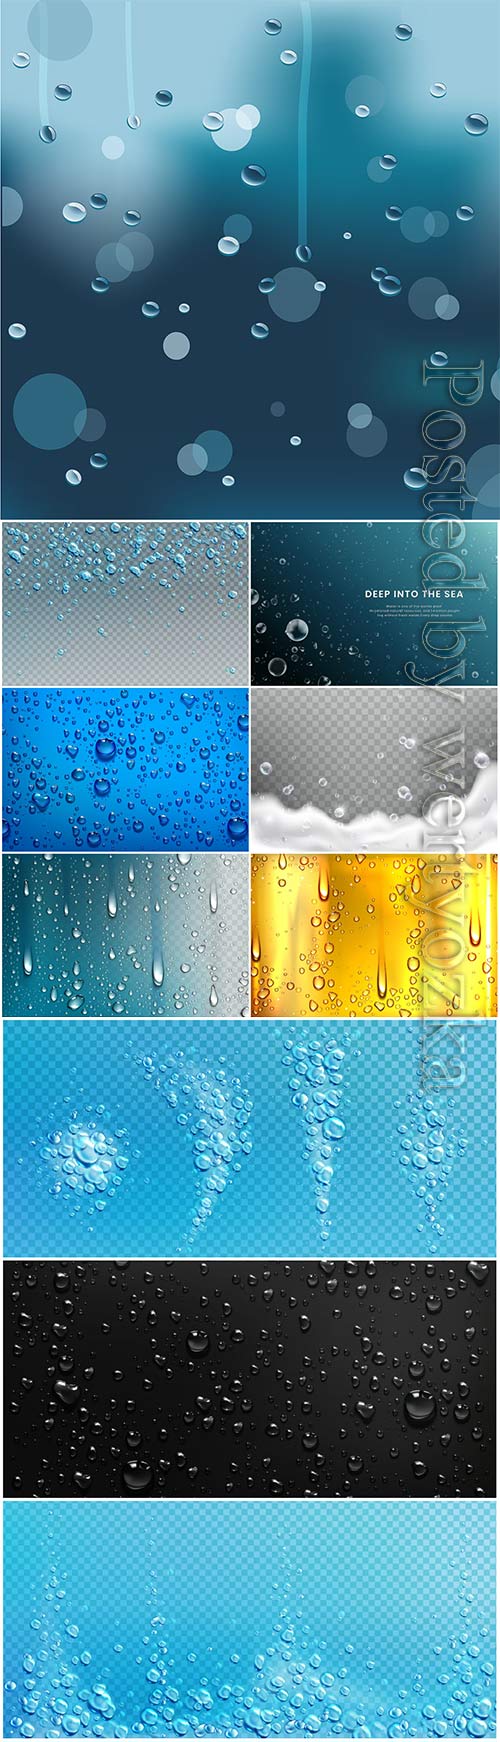 Water droplets vector background